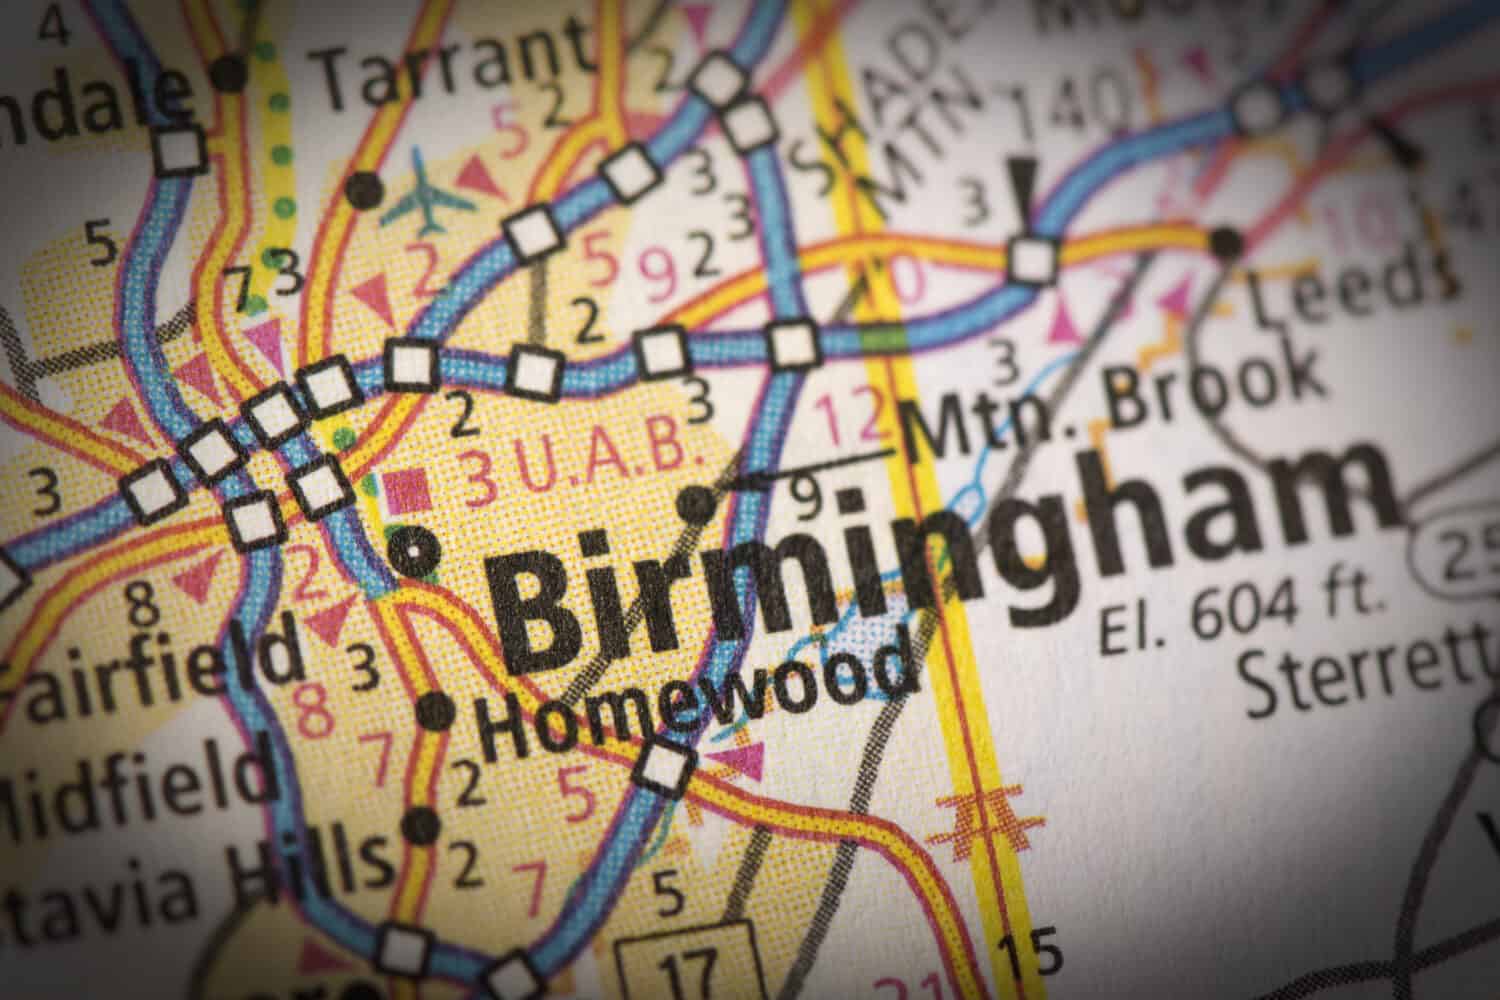 Closeup of Birmingham, Alabama on a road map of the United States.